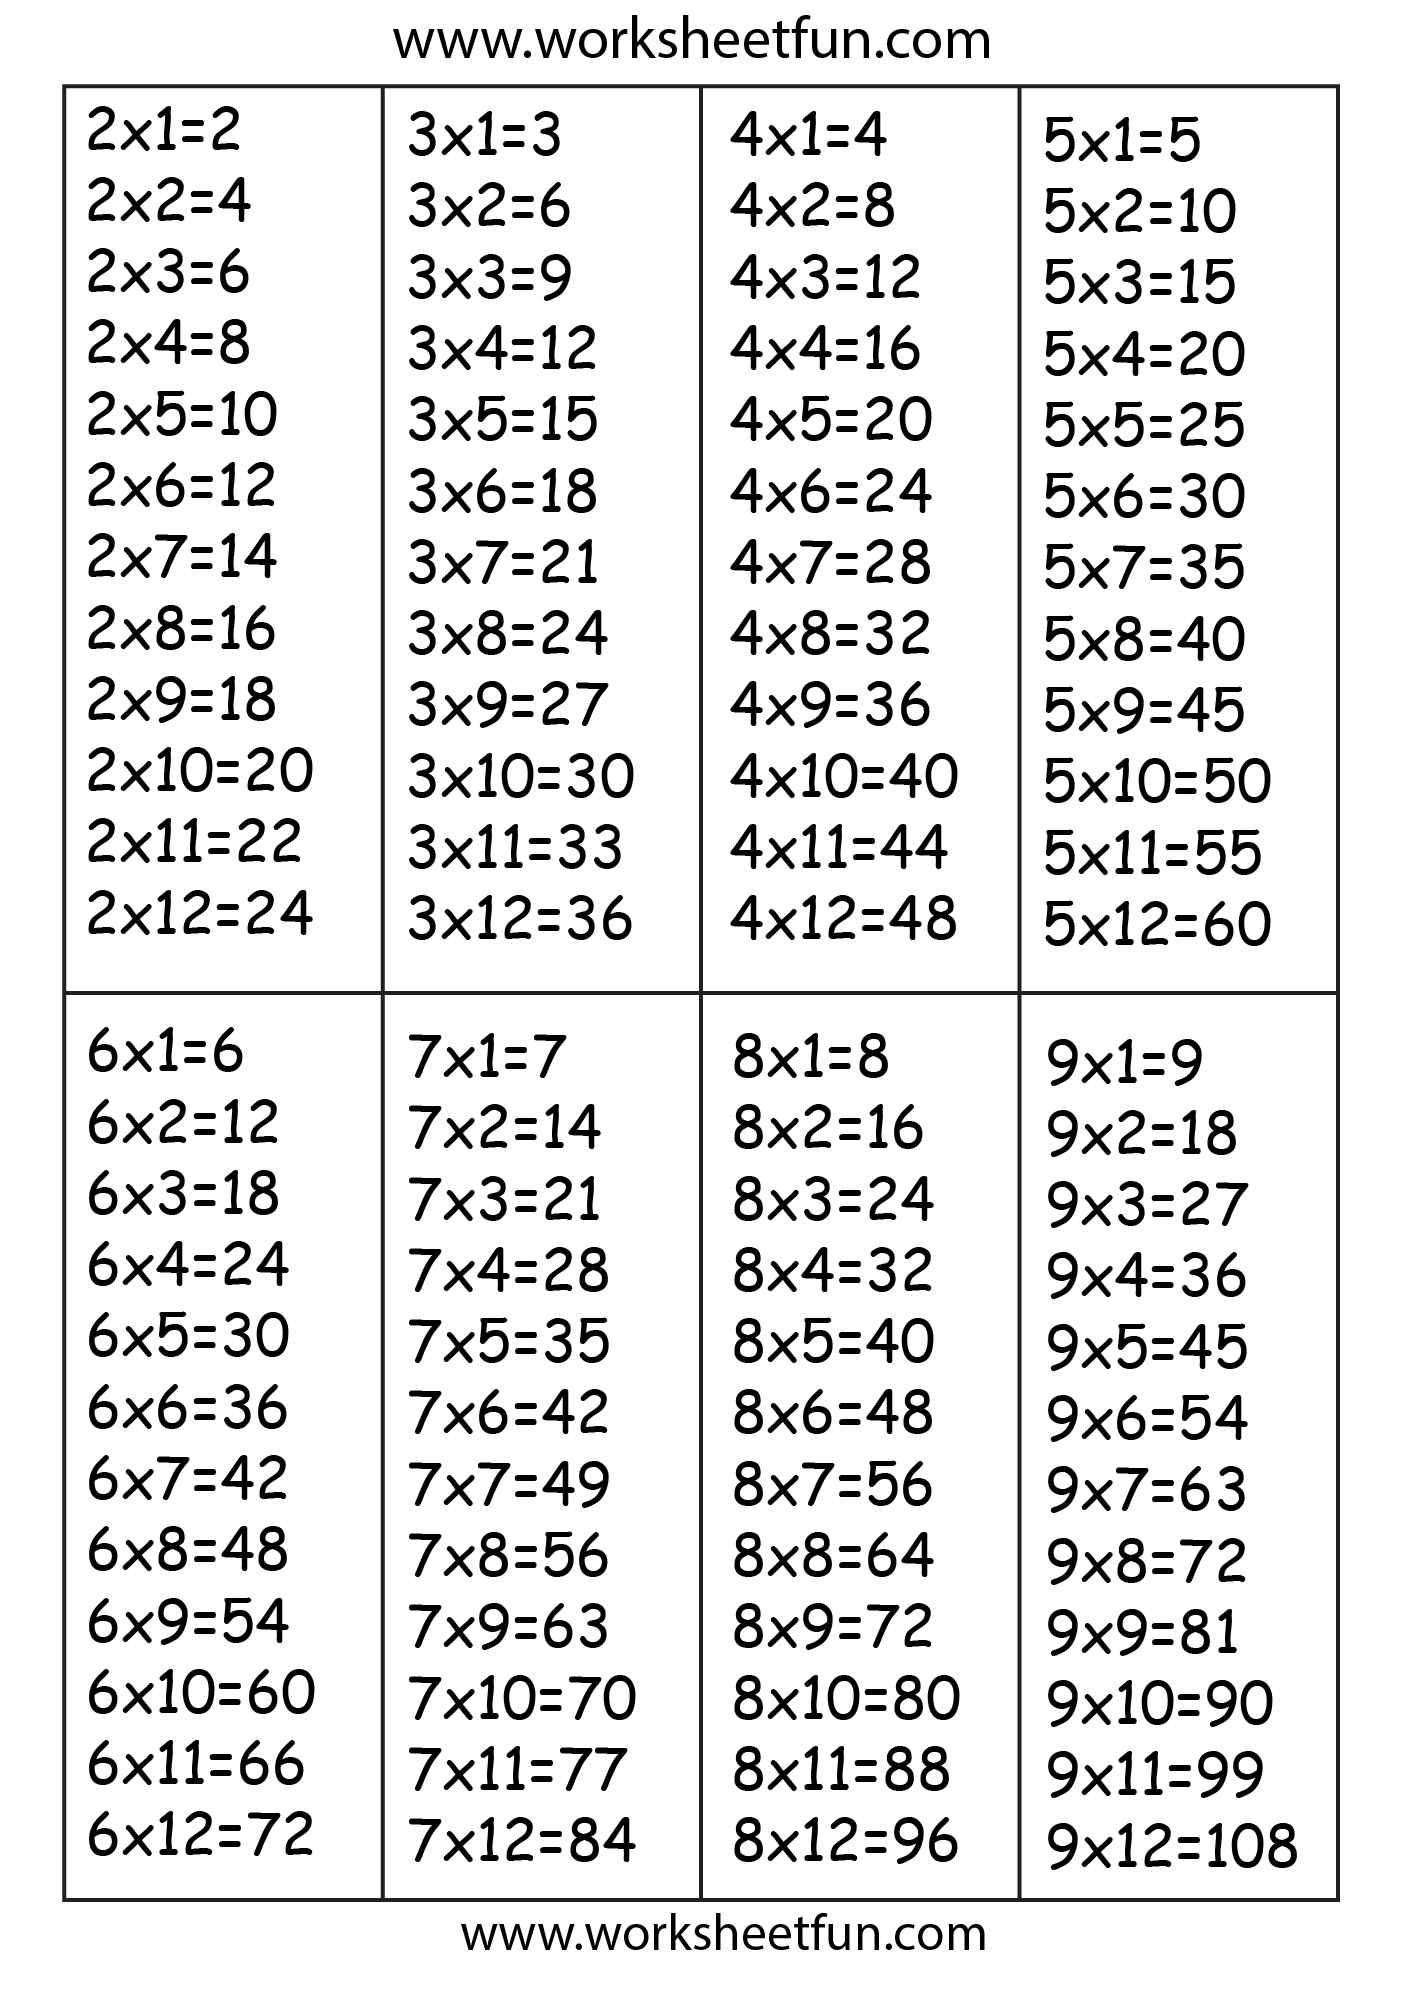 Times Table Chart – 2, 3, 4, 5, 6, 7, 8 & 9 / FREE Printable Worksheets